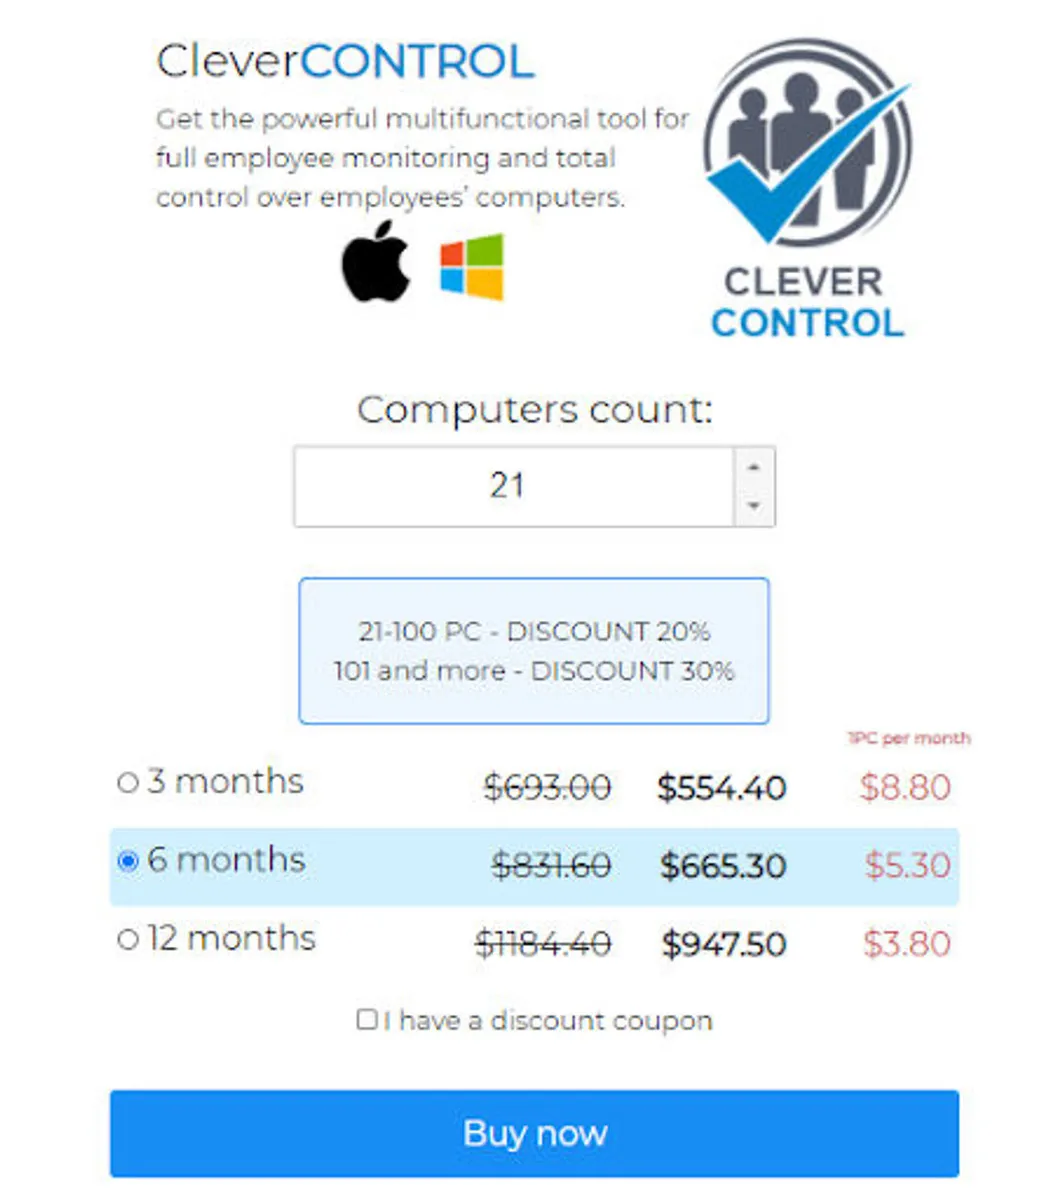 CleverControl Pricing Plan